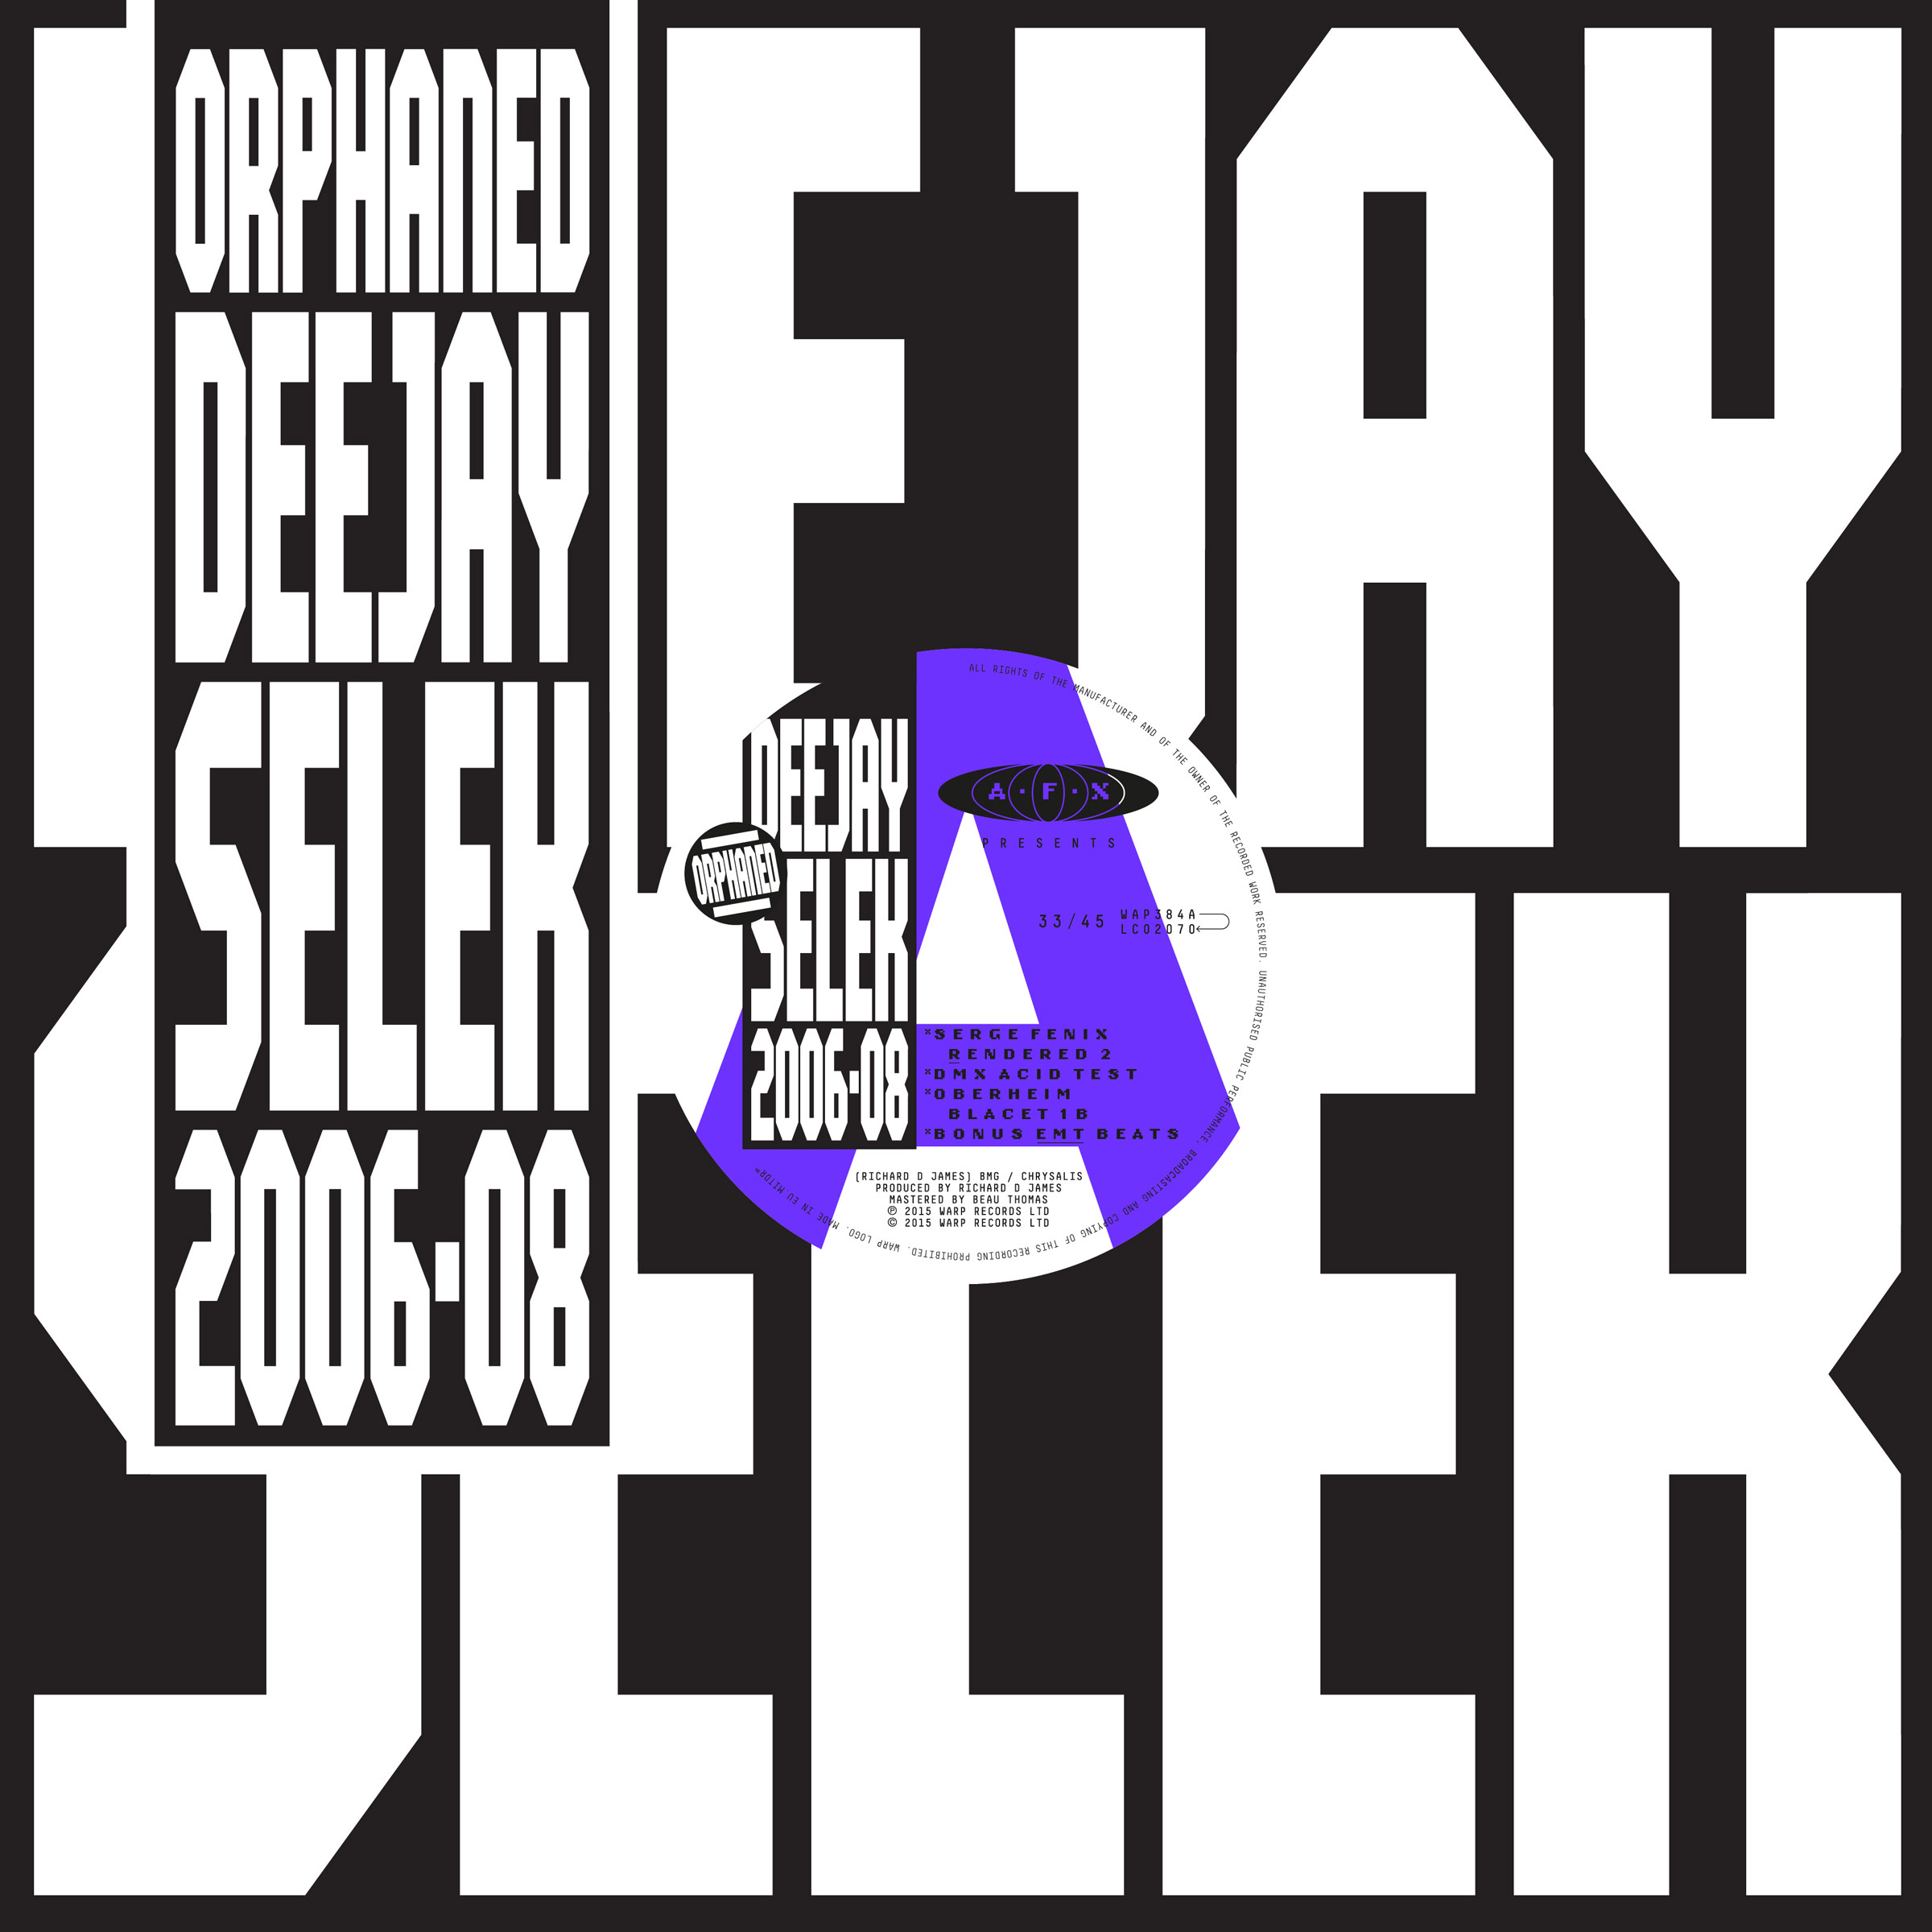 Aphex Twin Shares new AFX Track // 'orphaned deejay selek 2006-2008' EP